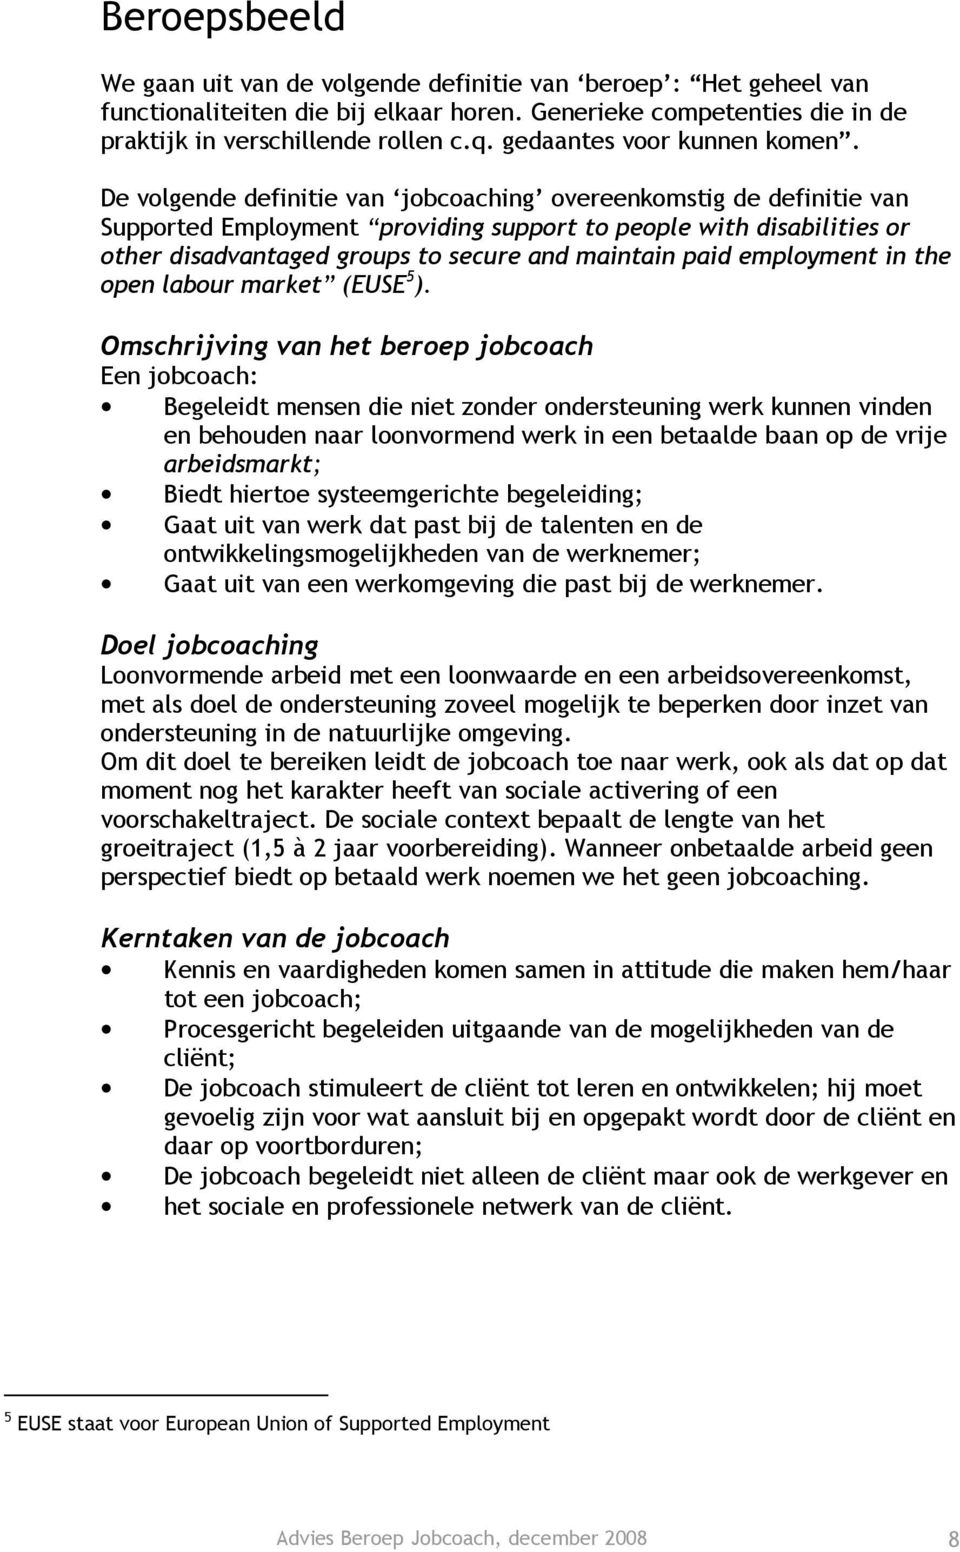 De volgende definitie van jobcoaching overeenkomstig de definitie van Supported Employment providing support to people with disabilities or other disadvantaged groups to secure and maintain paid